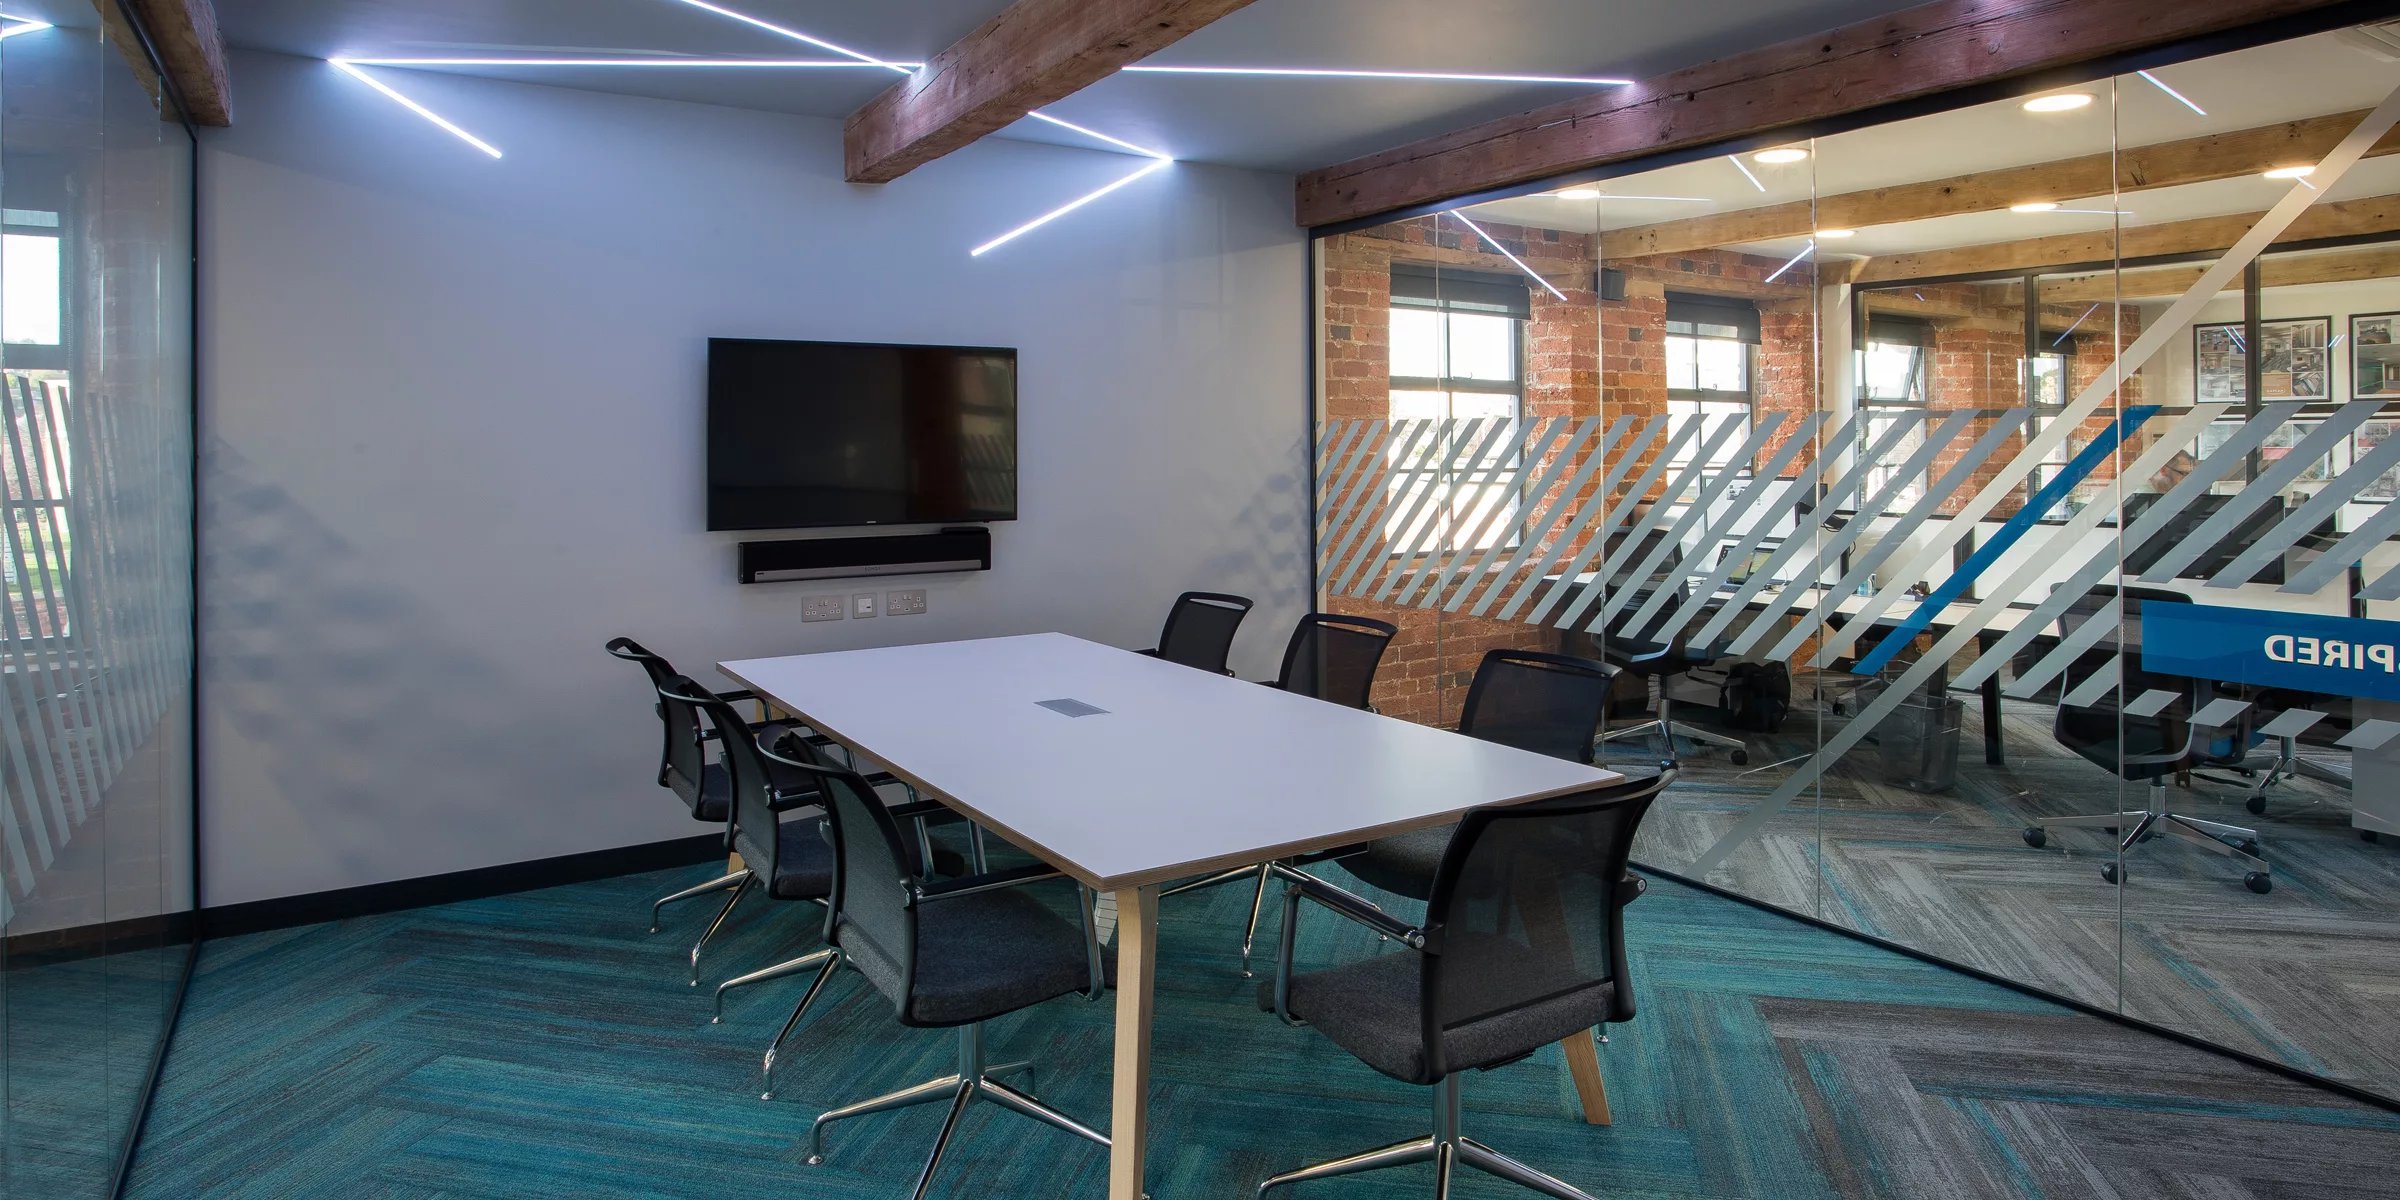 Office fit out header image 2 2021 04 20 151007 from aci